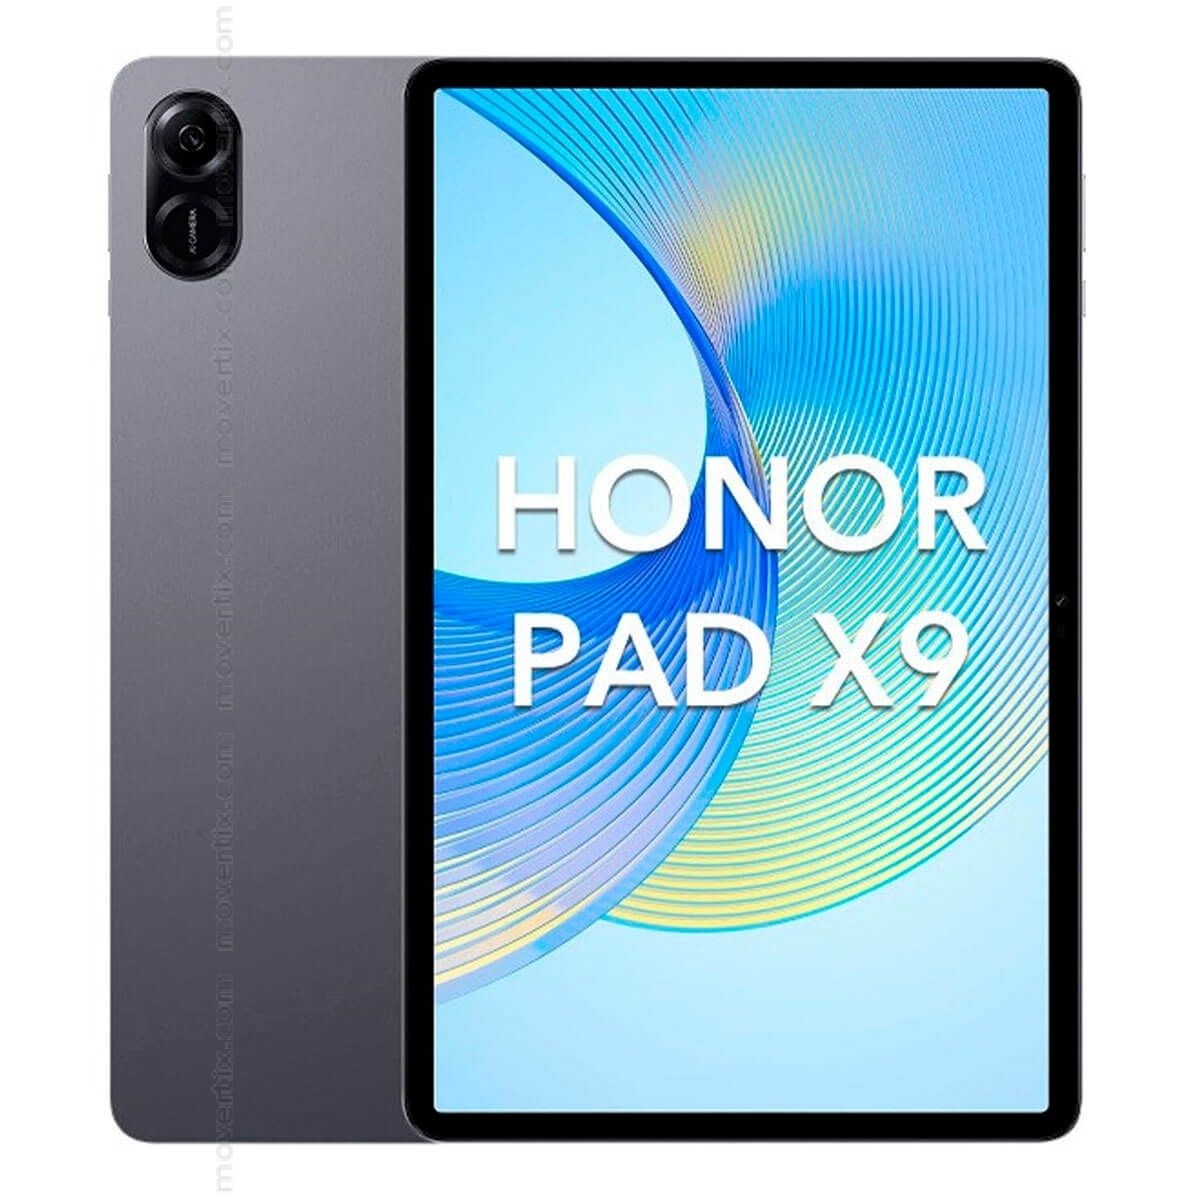 HONOR PAD X9 (4GB+128GB) LTE + WIFI, Snapdragon 685, Original Honor  Product, Warranty by Honor Center